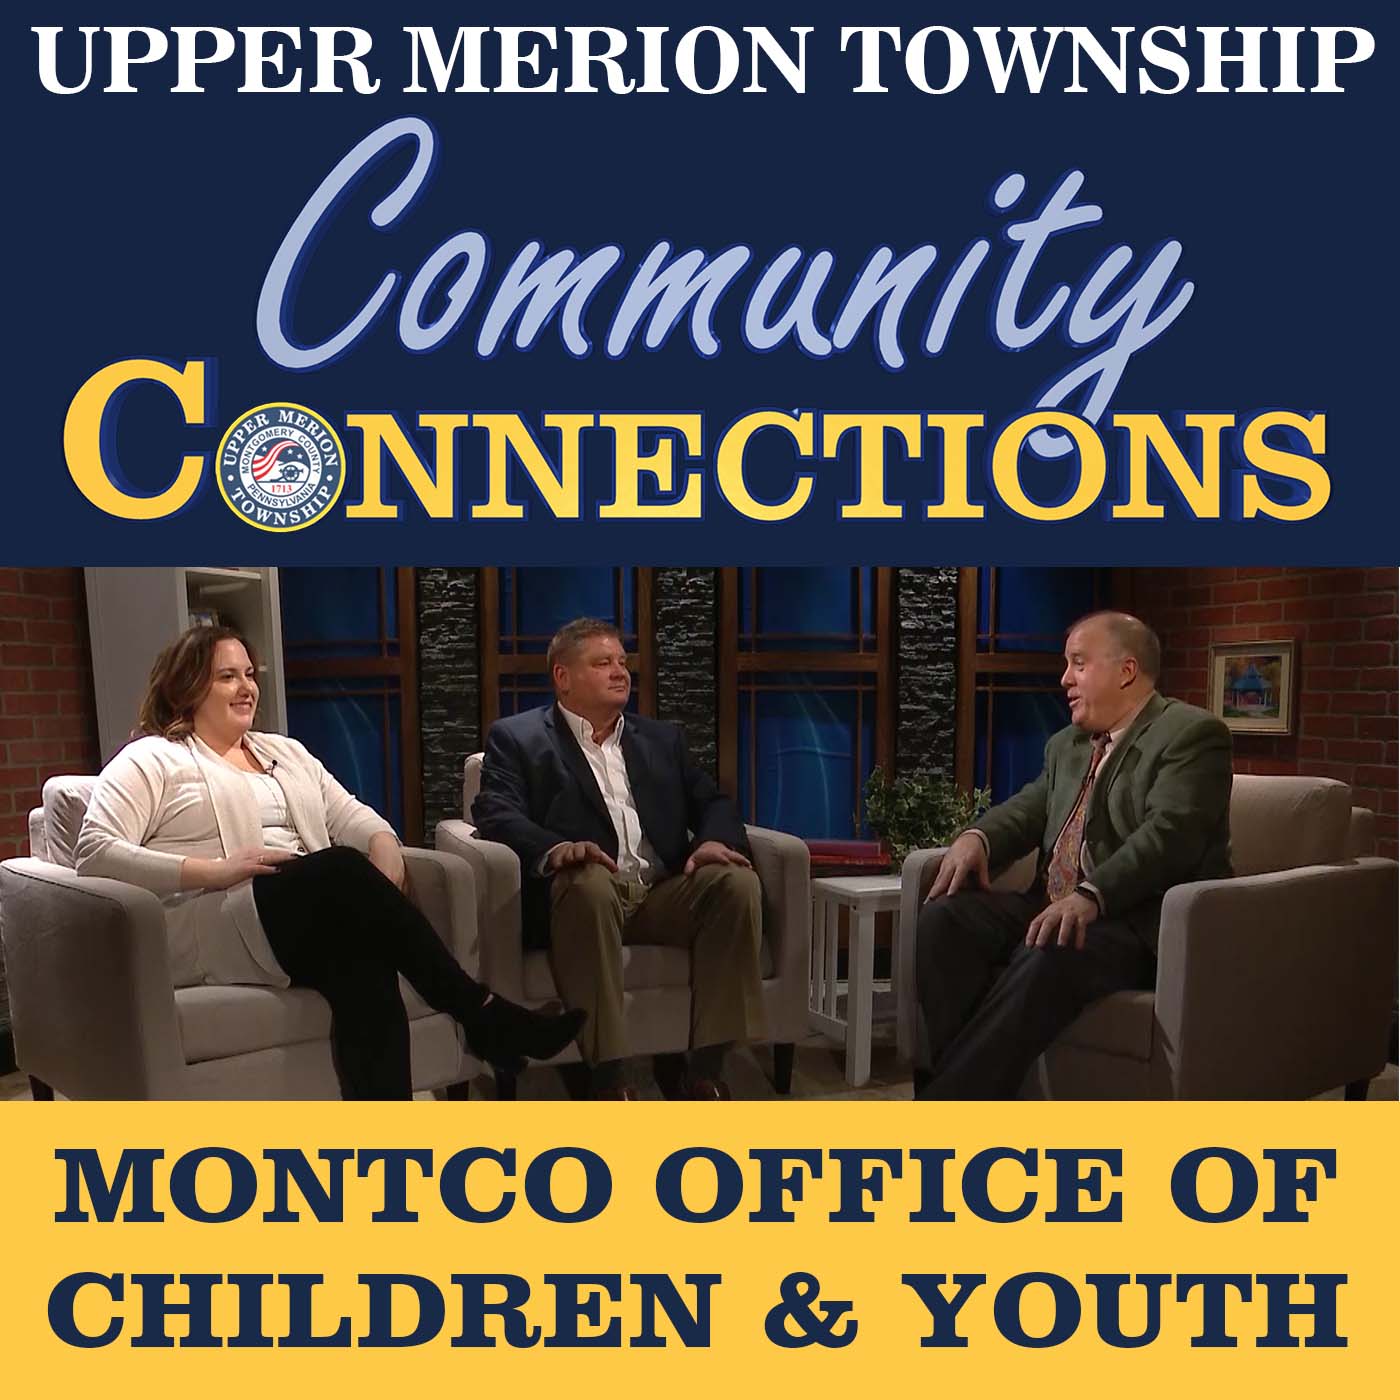 The Montgomery County Office of Children and Youth